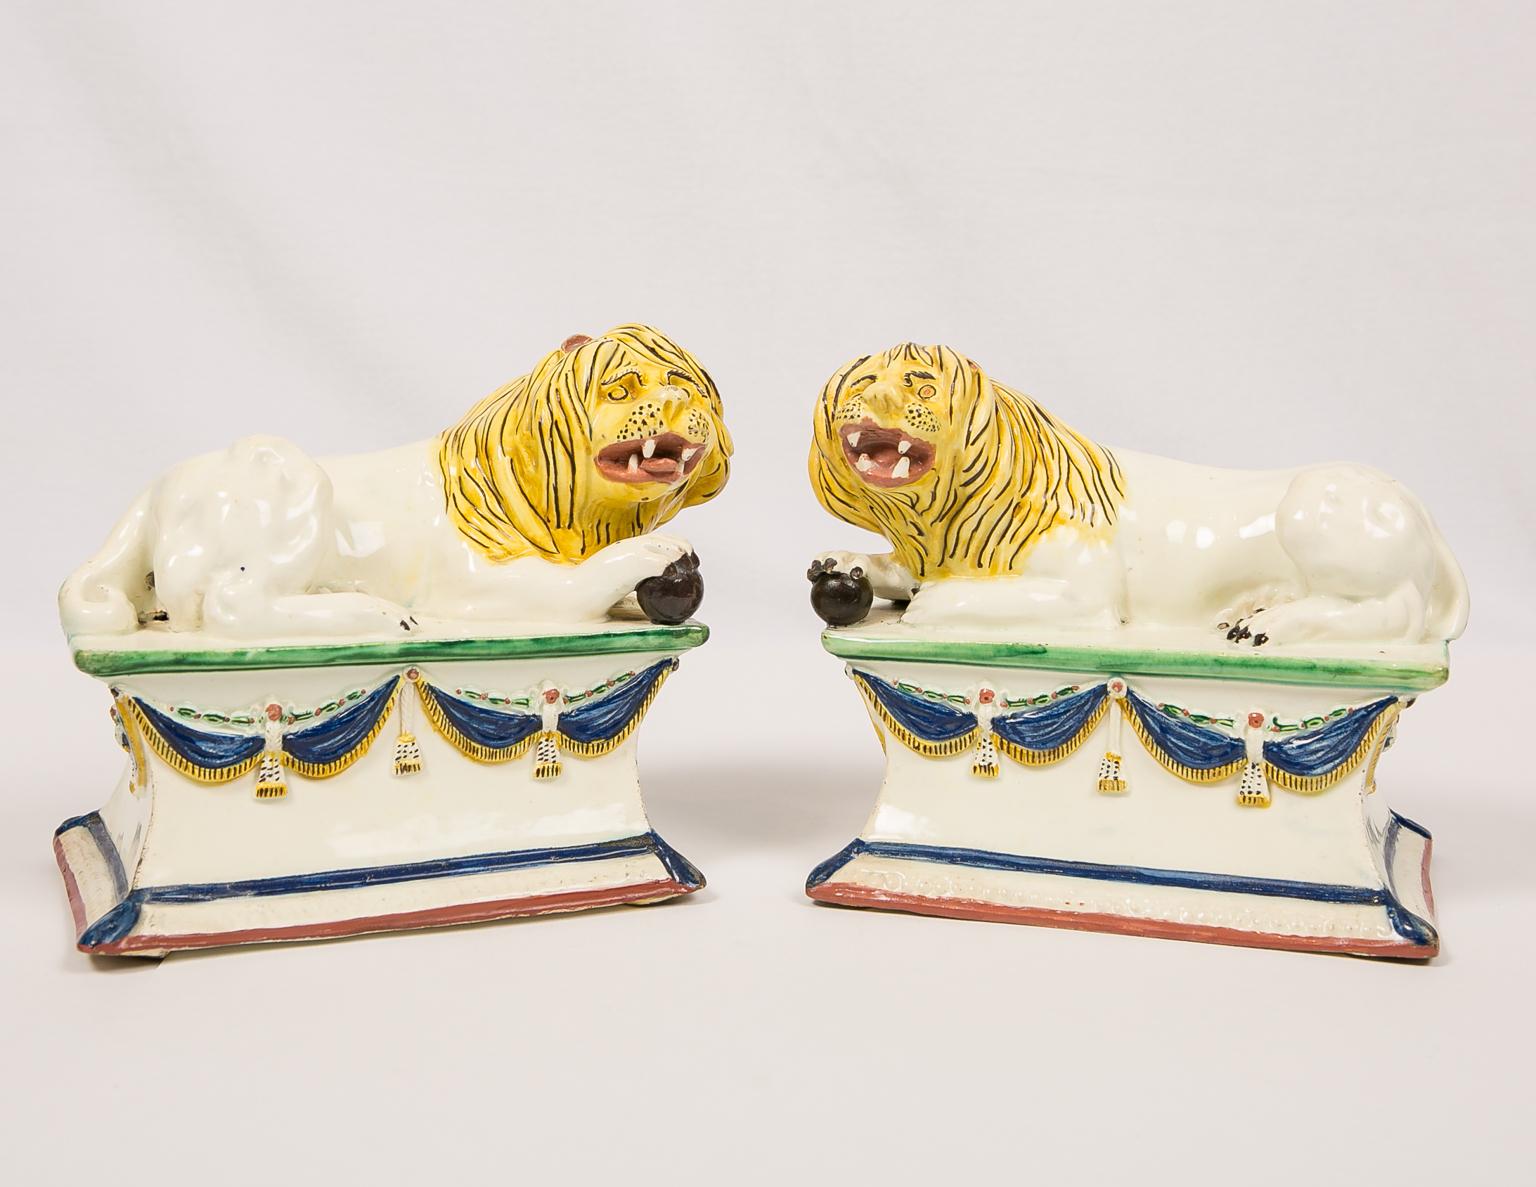 We are thrilled to offer this exceptional pair of creamware lions, each elegantly resting on a tall base adorned with sumptuous swags of dark blue 